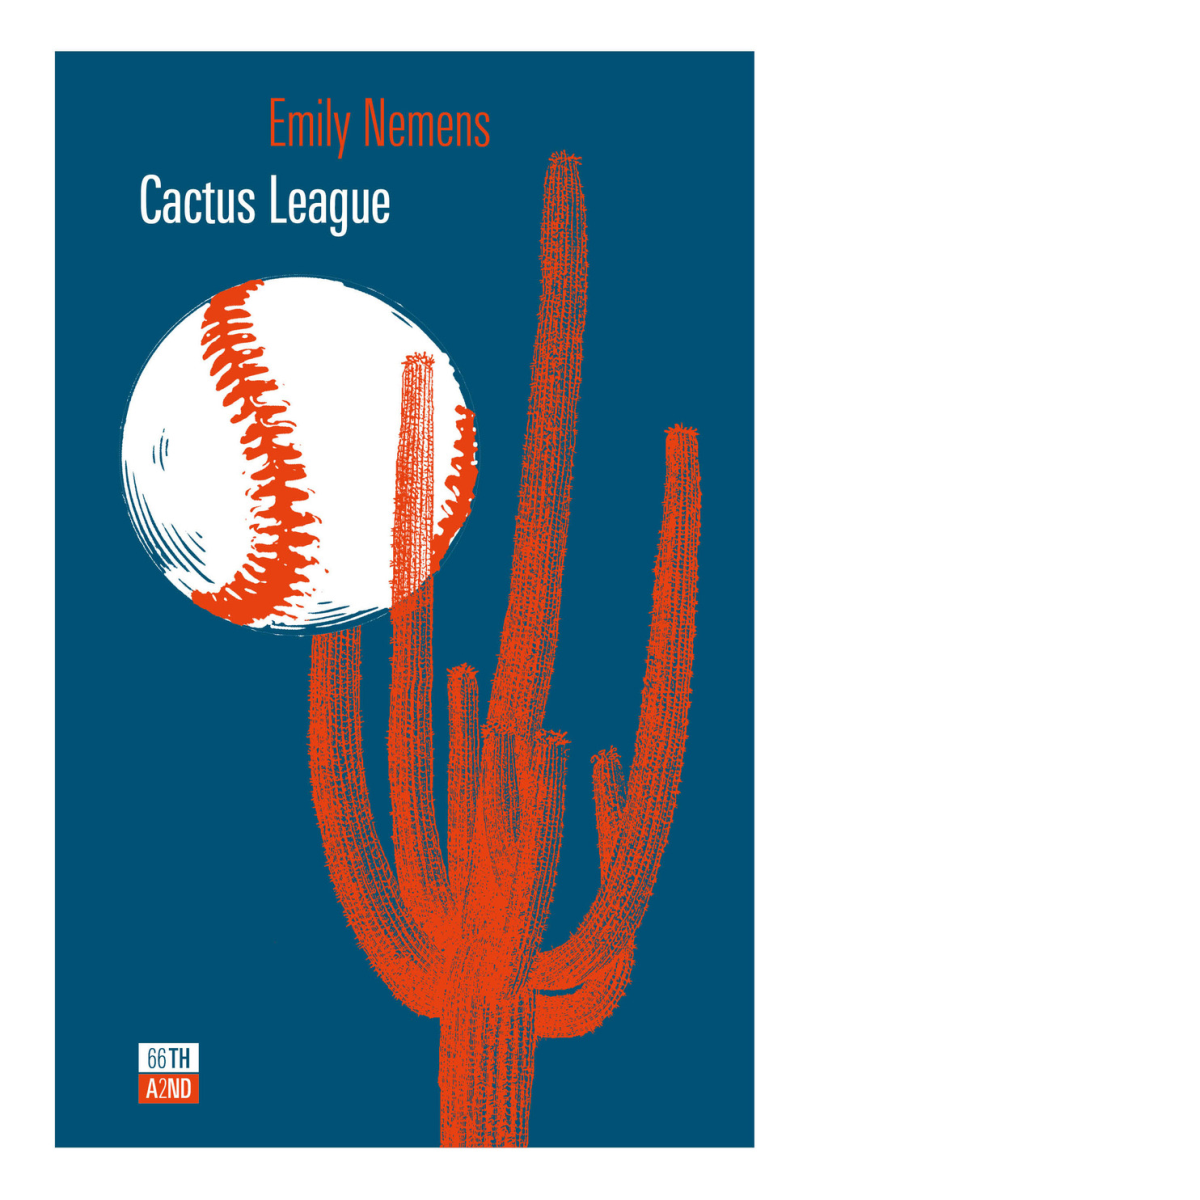 Cactus League di Emily Nemens,  2021,  66th And 2nd